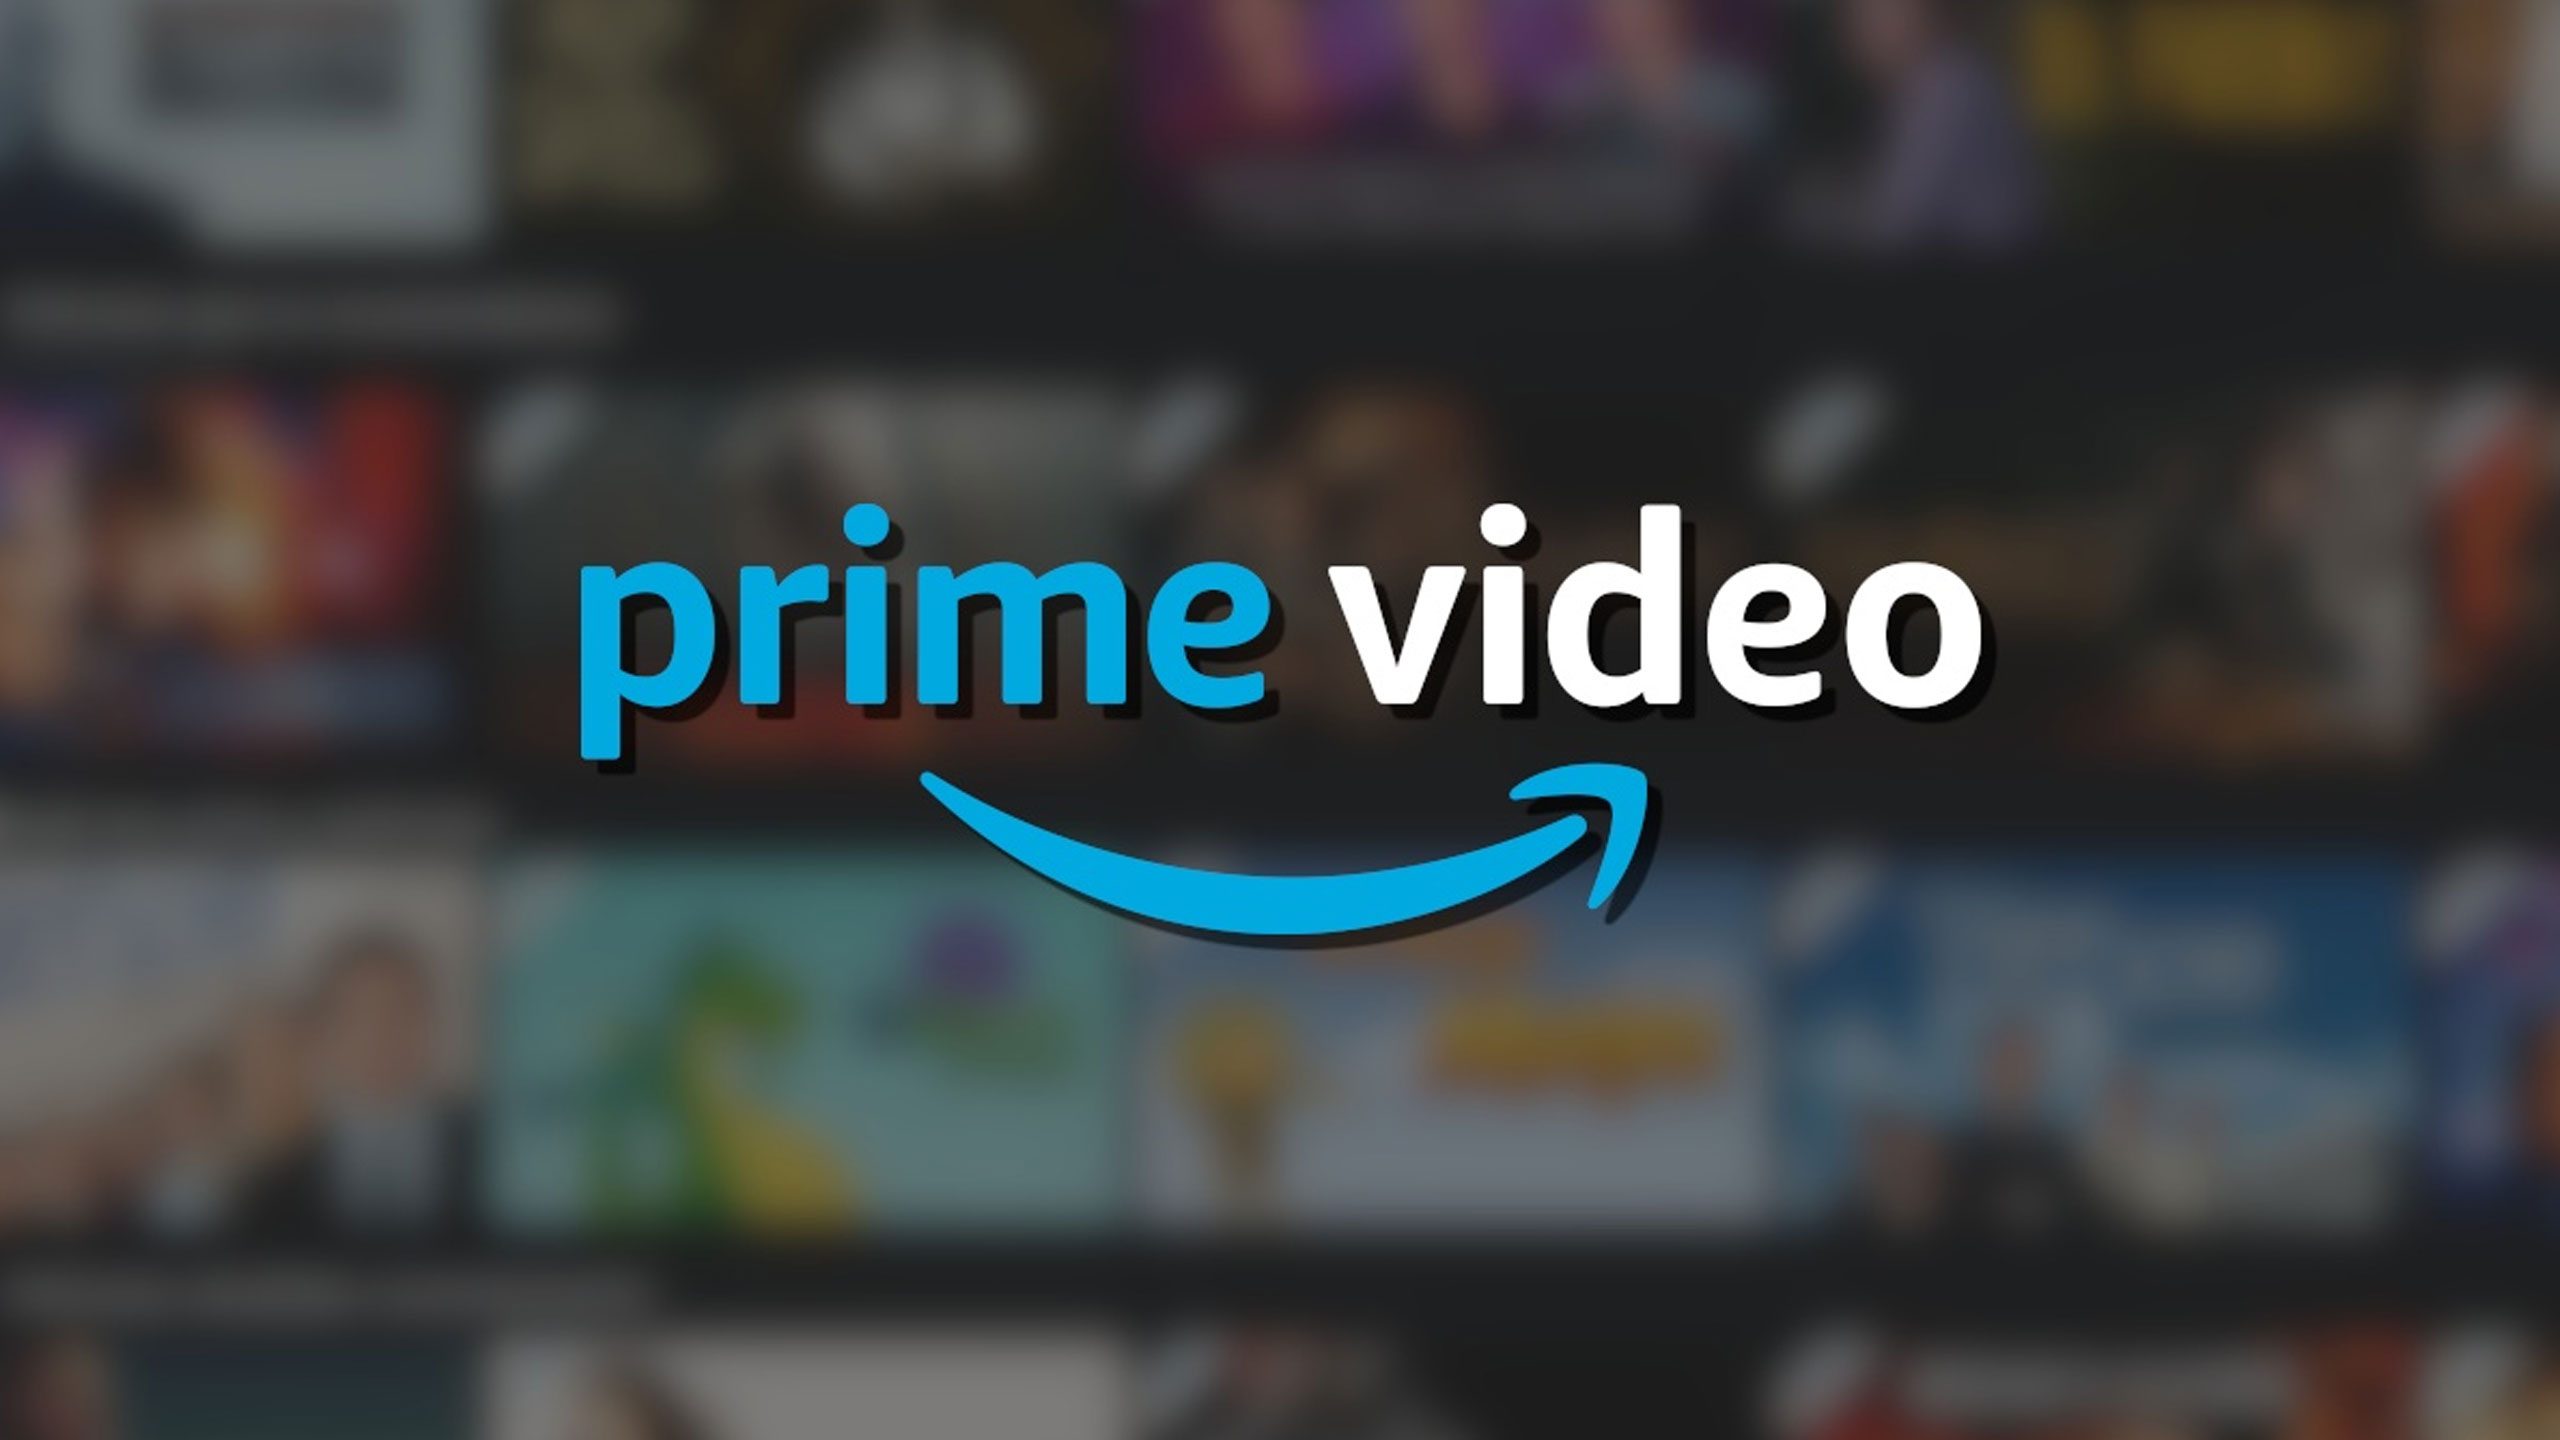 Amazon is asking for extra money for Dolby Vision and Atmos under Prime Video